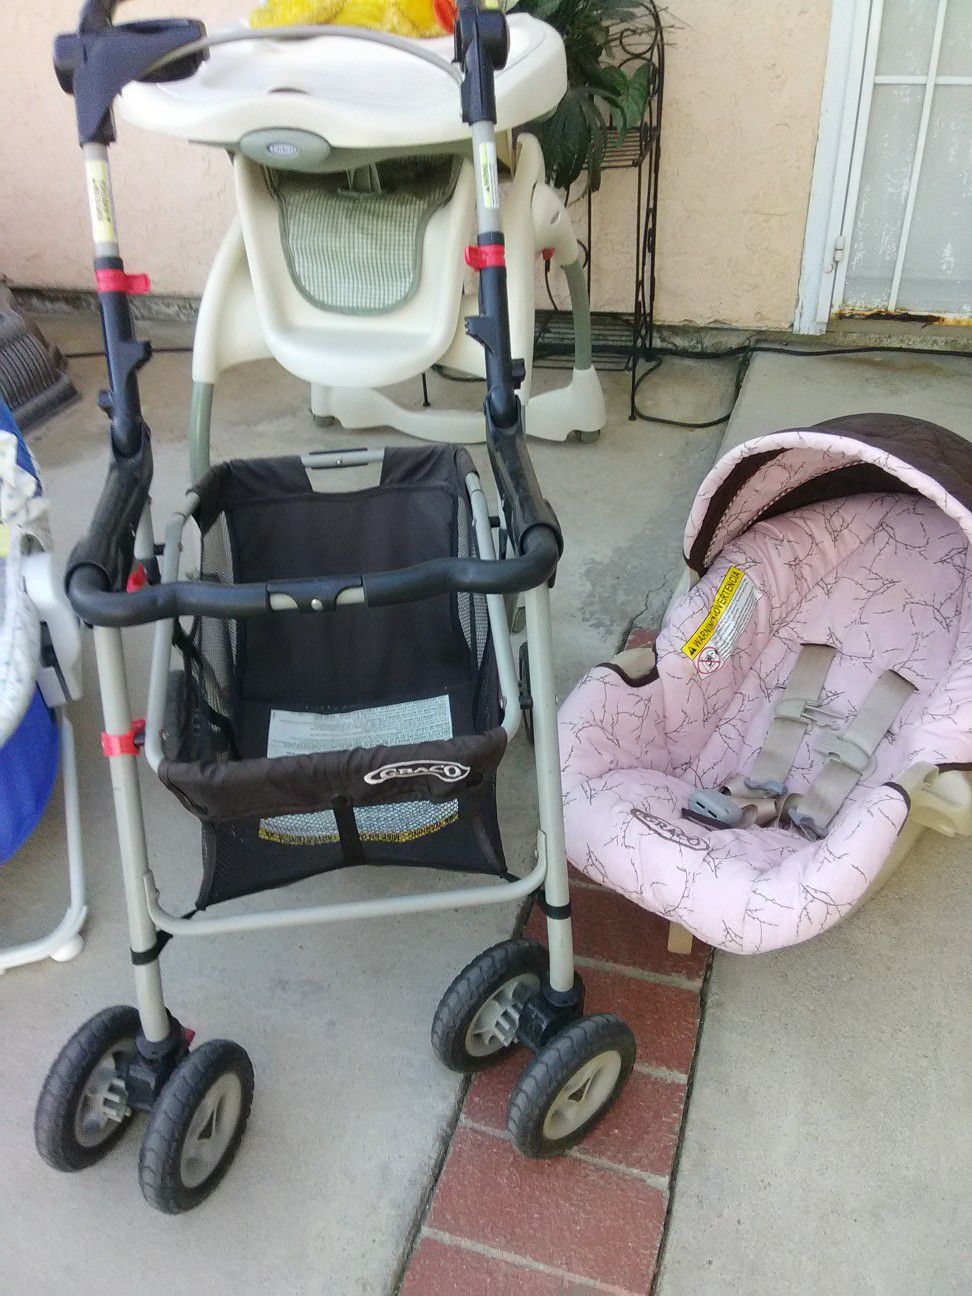 Graco stroller complete set w/base$30 firm